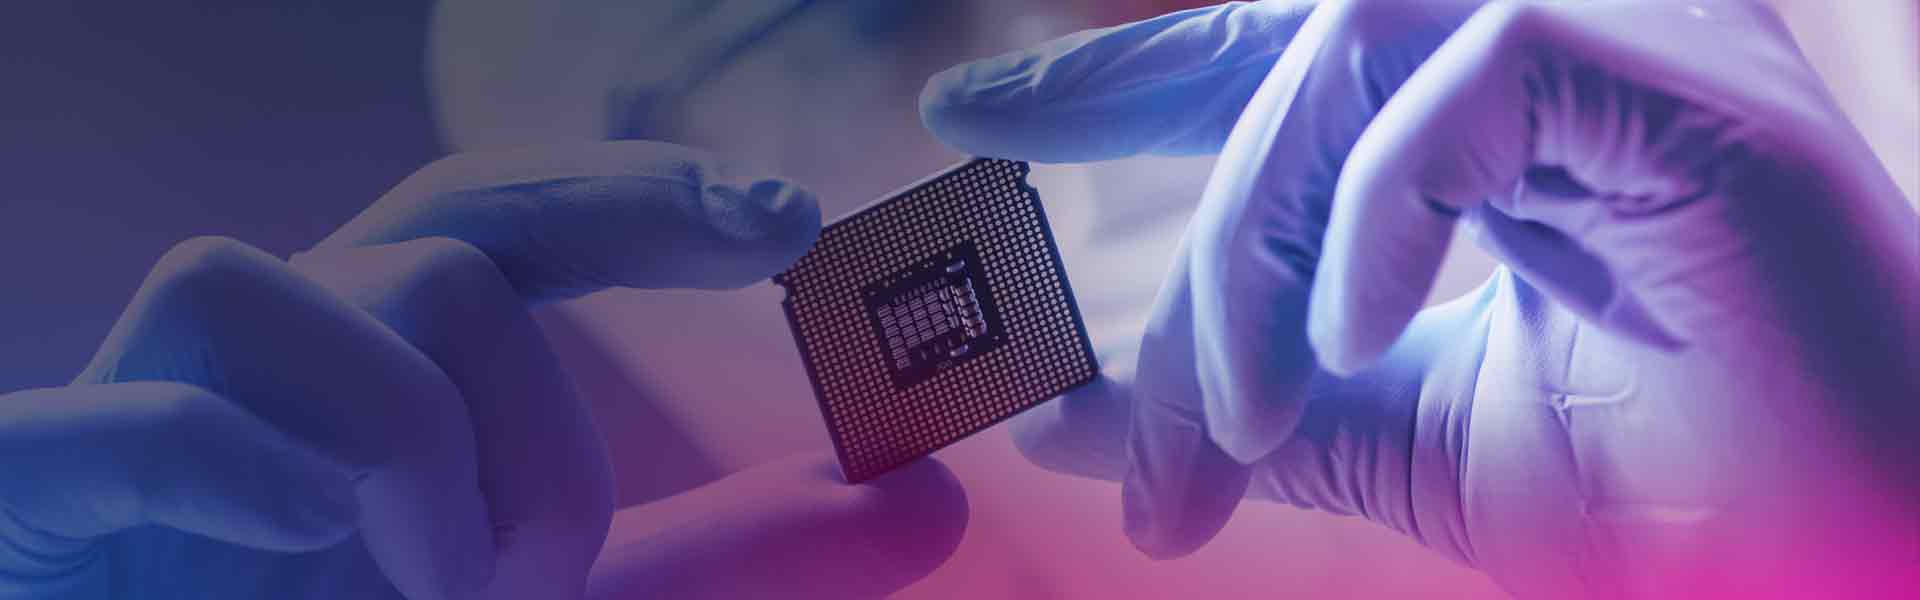 image of microchip technology being examined